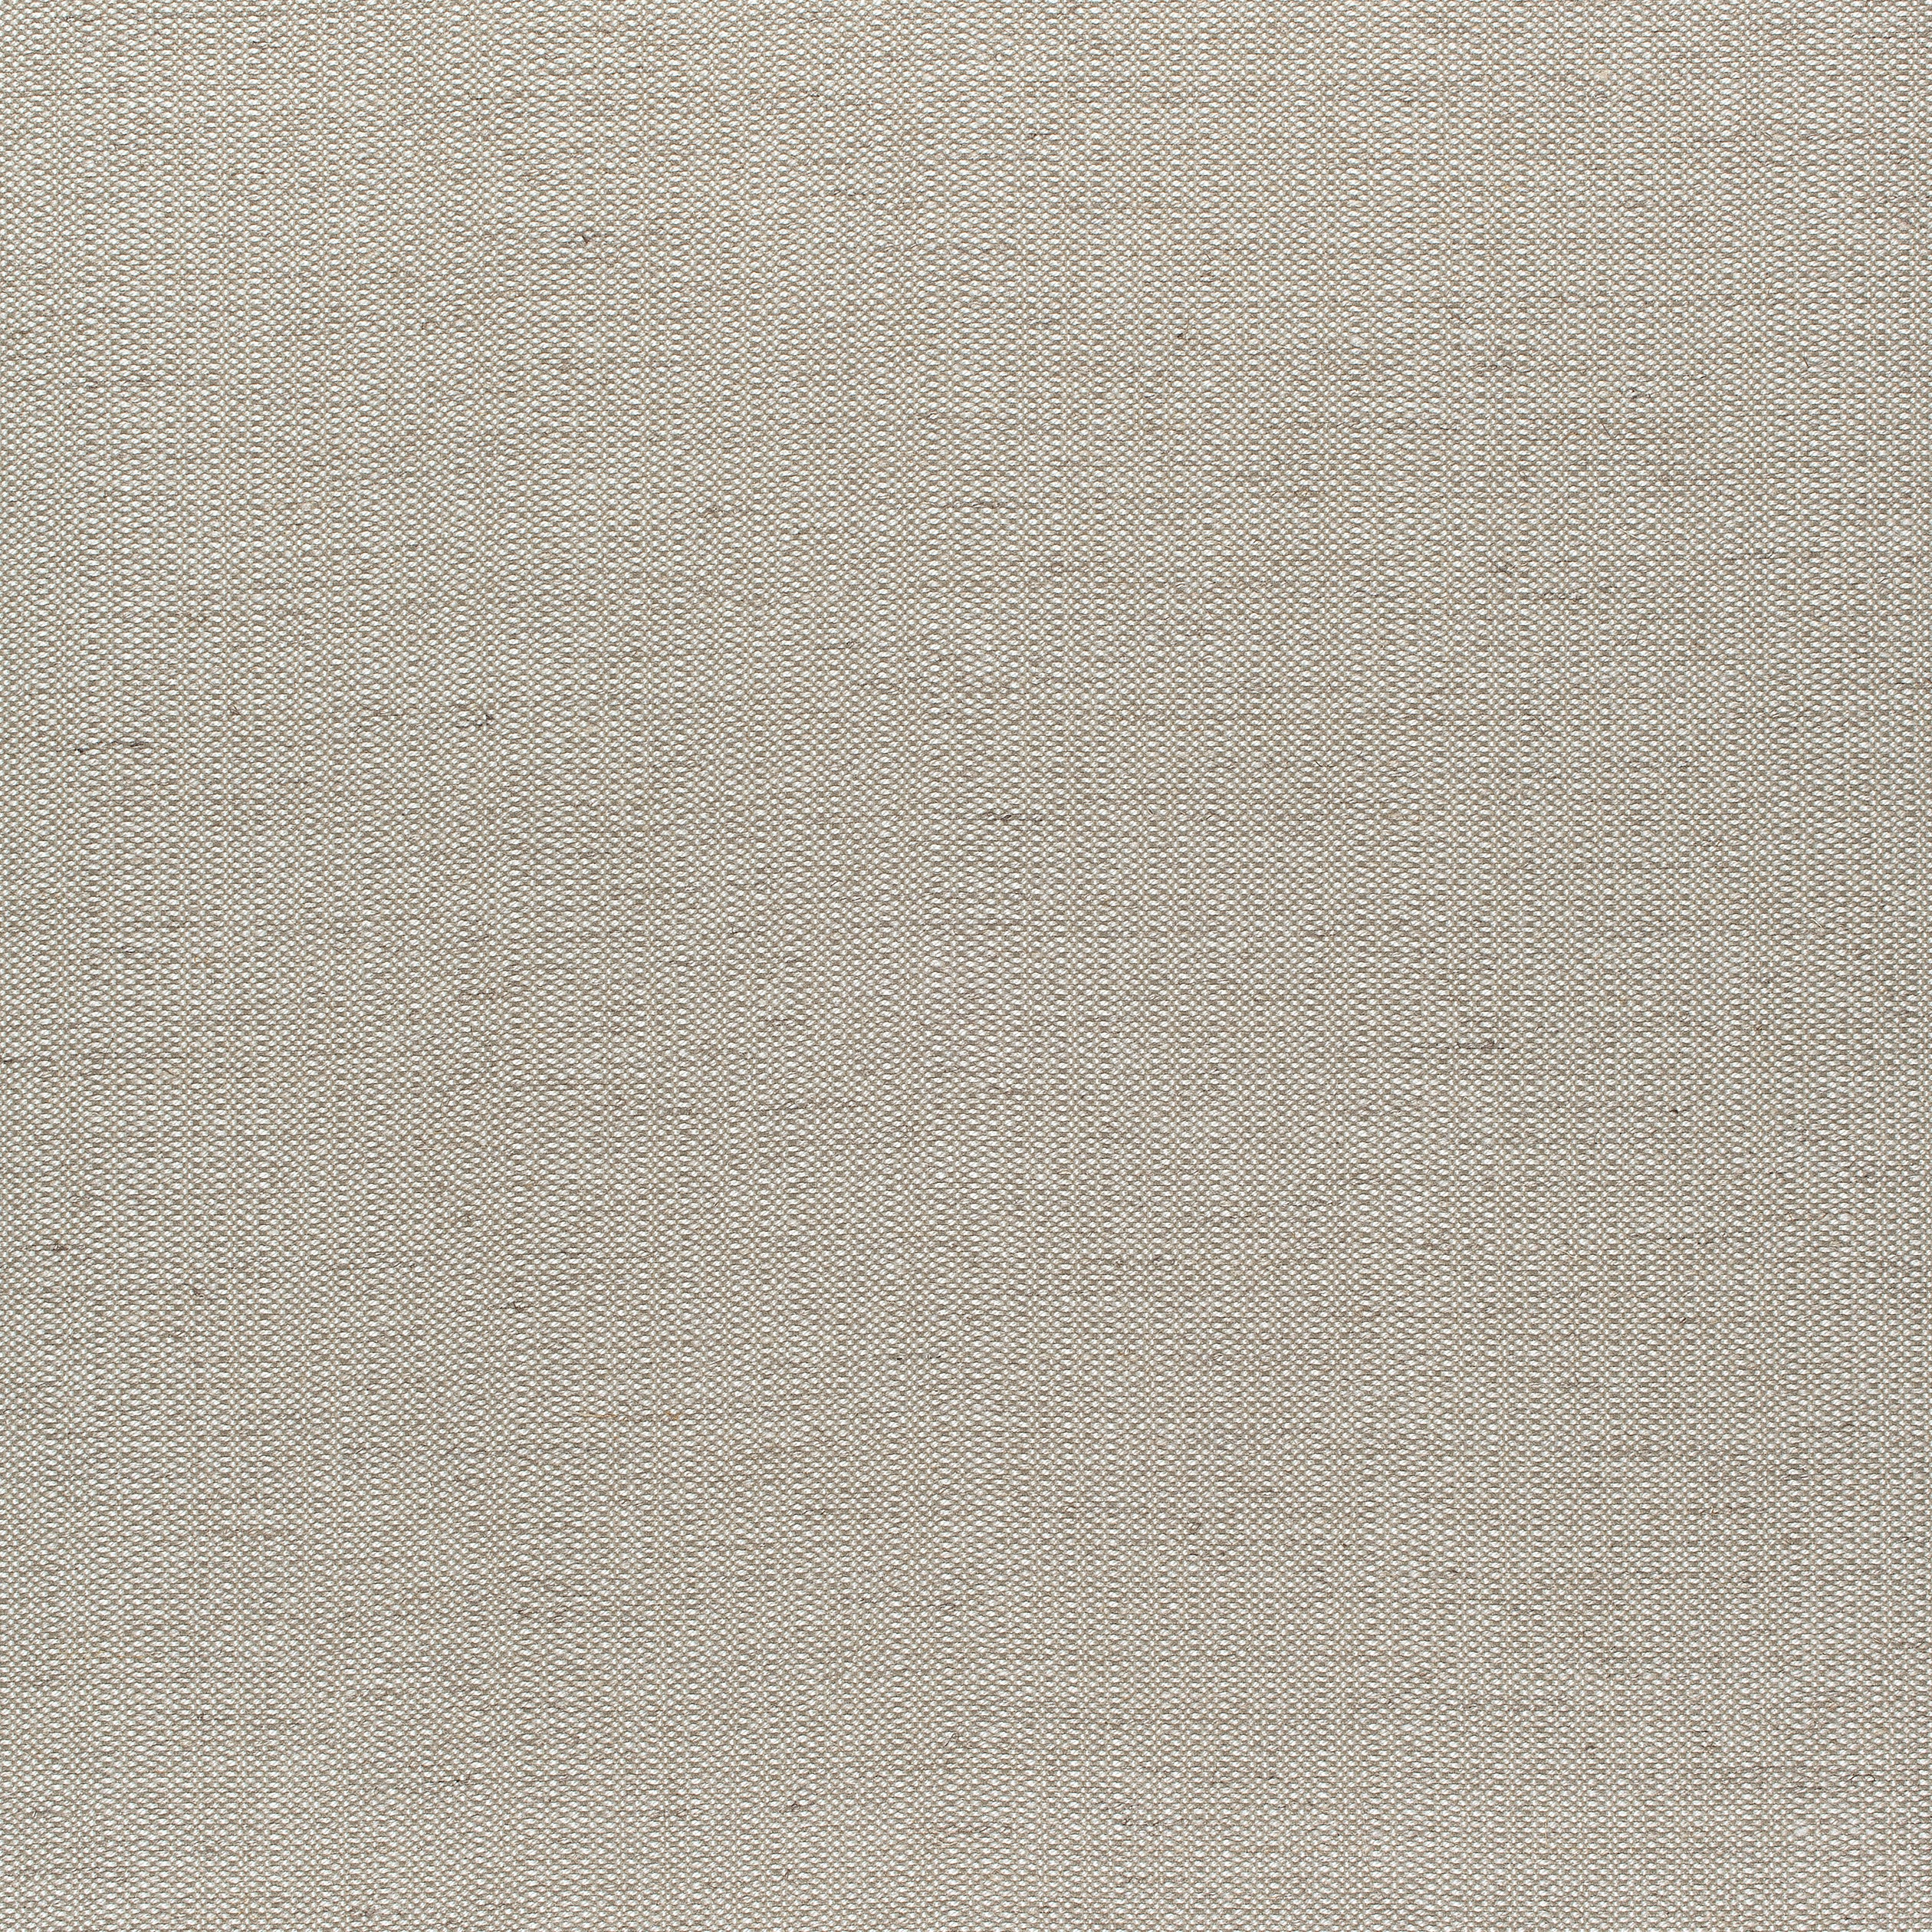 Brooks fabric in linen color - pattern number W73374 - by Thibaut in the Nomad collection